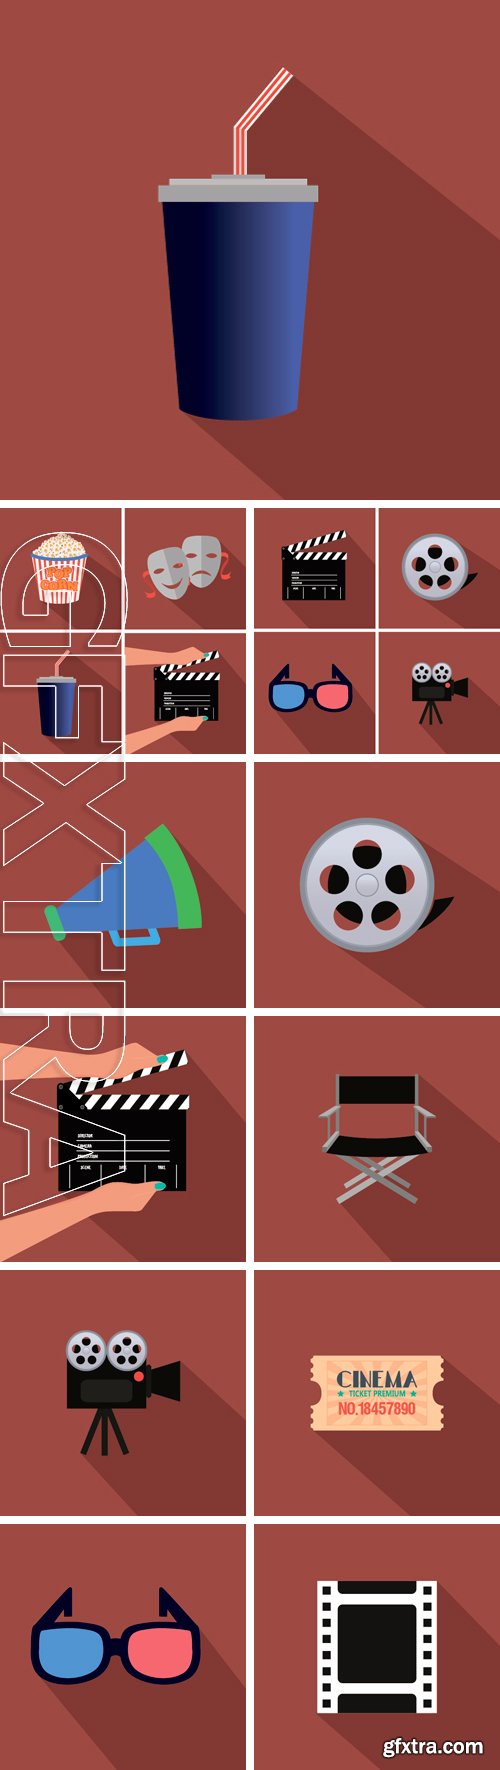 Stock Vectors - Abstract cinema object on a special red background